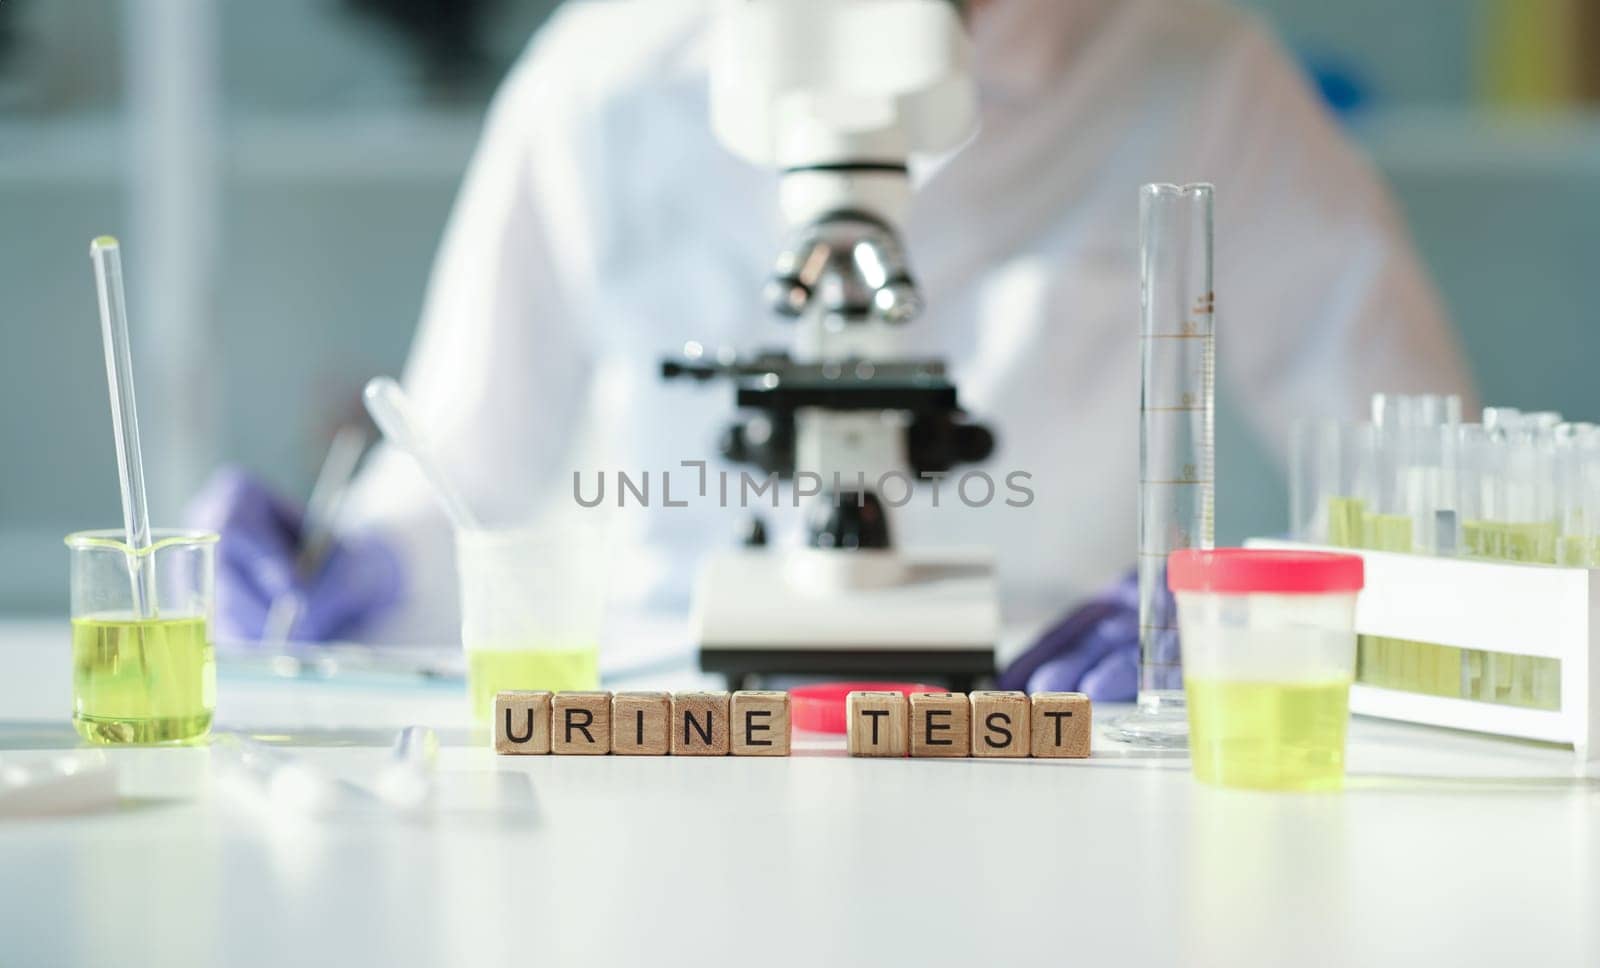 Word urine test on wooden cubes against background of microscope and jars in laboratory closeup by kuprevich